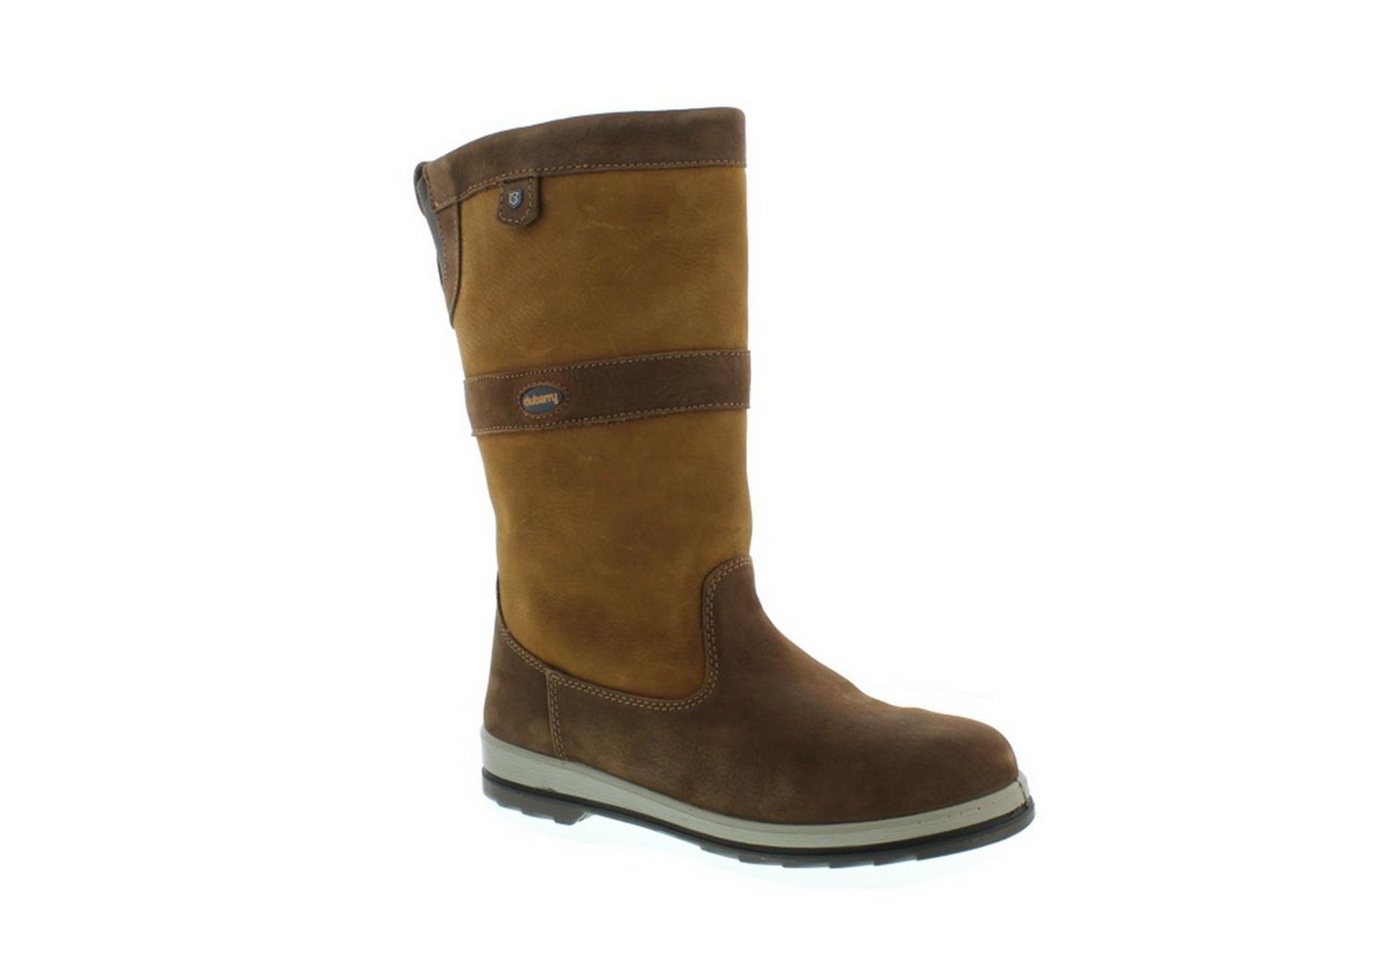 Dubarry Ultima Extra-Fit (extraweit), Dry Fast - Dry Soft, Leder, Gore-Tex Aus Bootsschuh von Dubarry